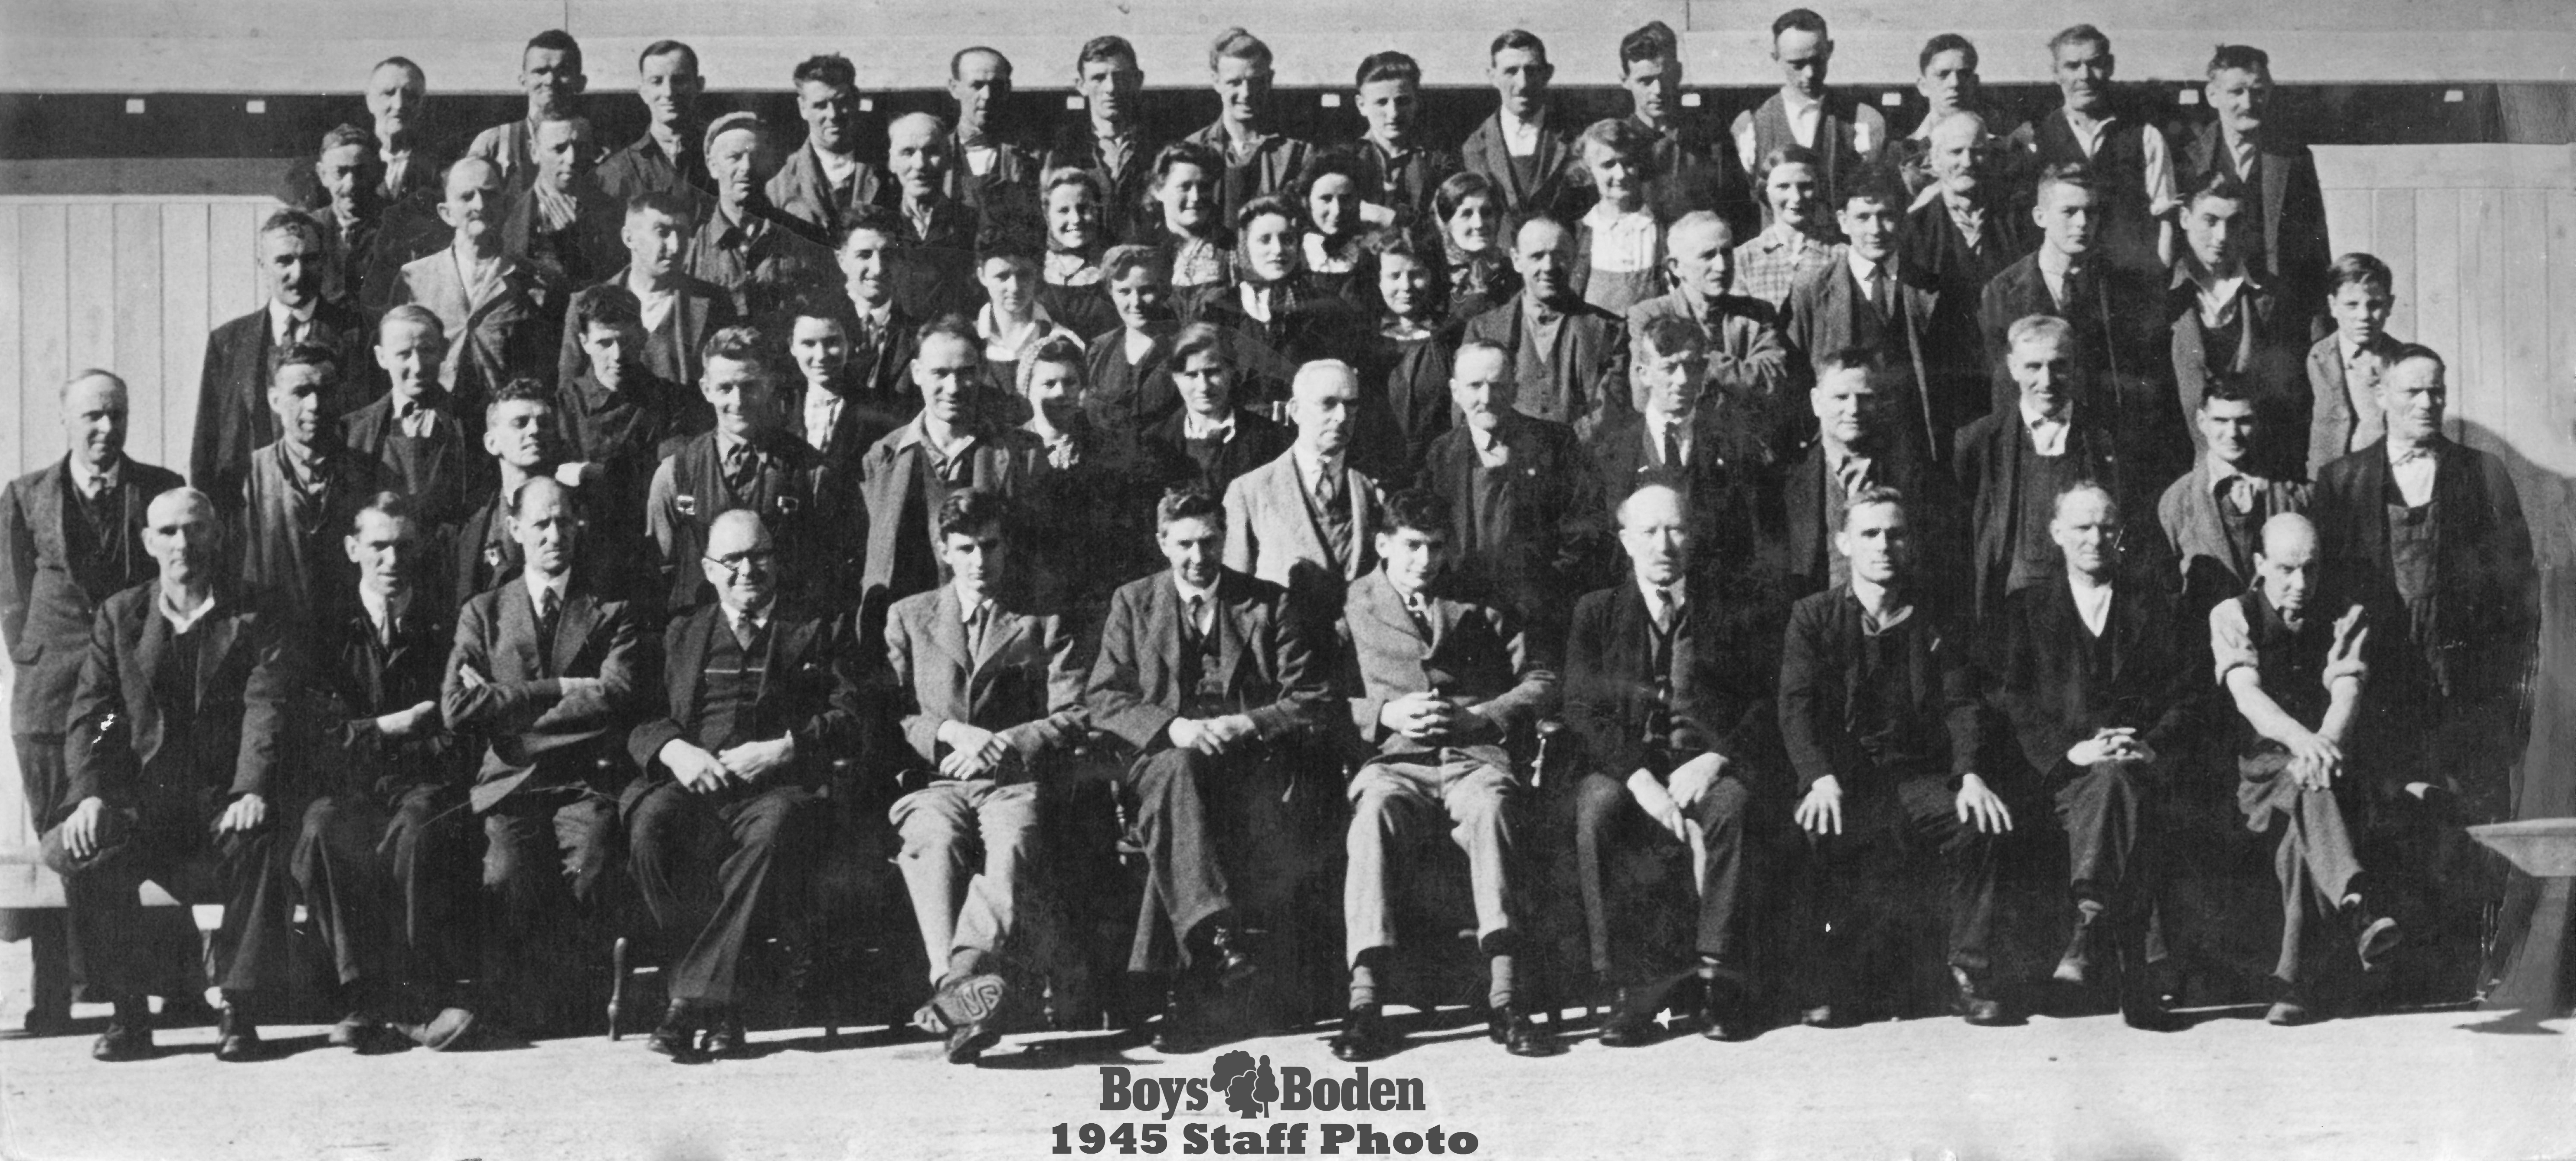 Boysa and boden staff photo 1945